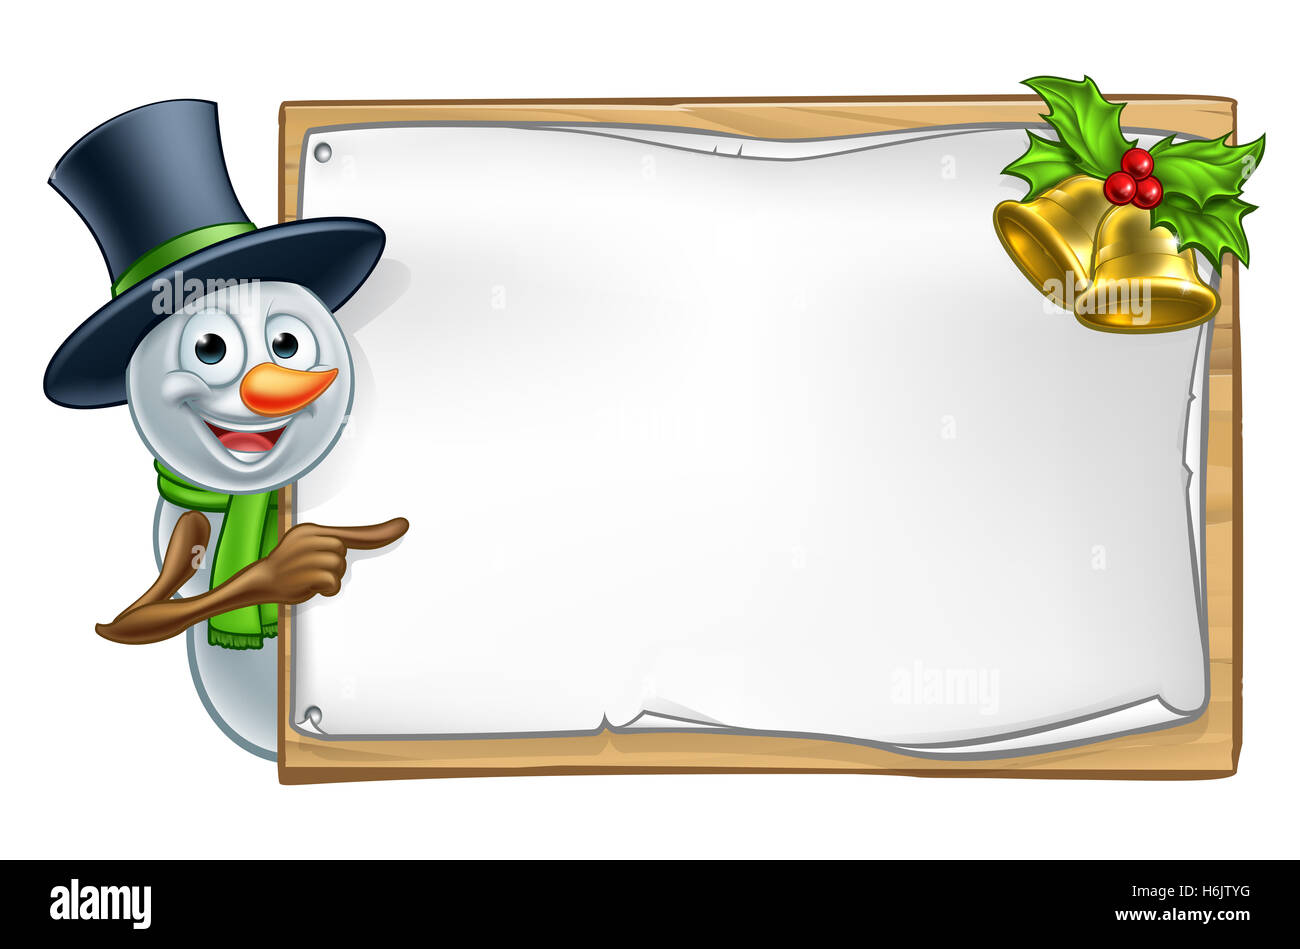 Christmas snowman cartoon character peeking around wooden scroll sign with gold bells and holly and pointing Stock Photo